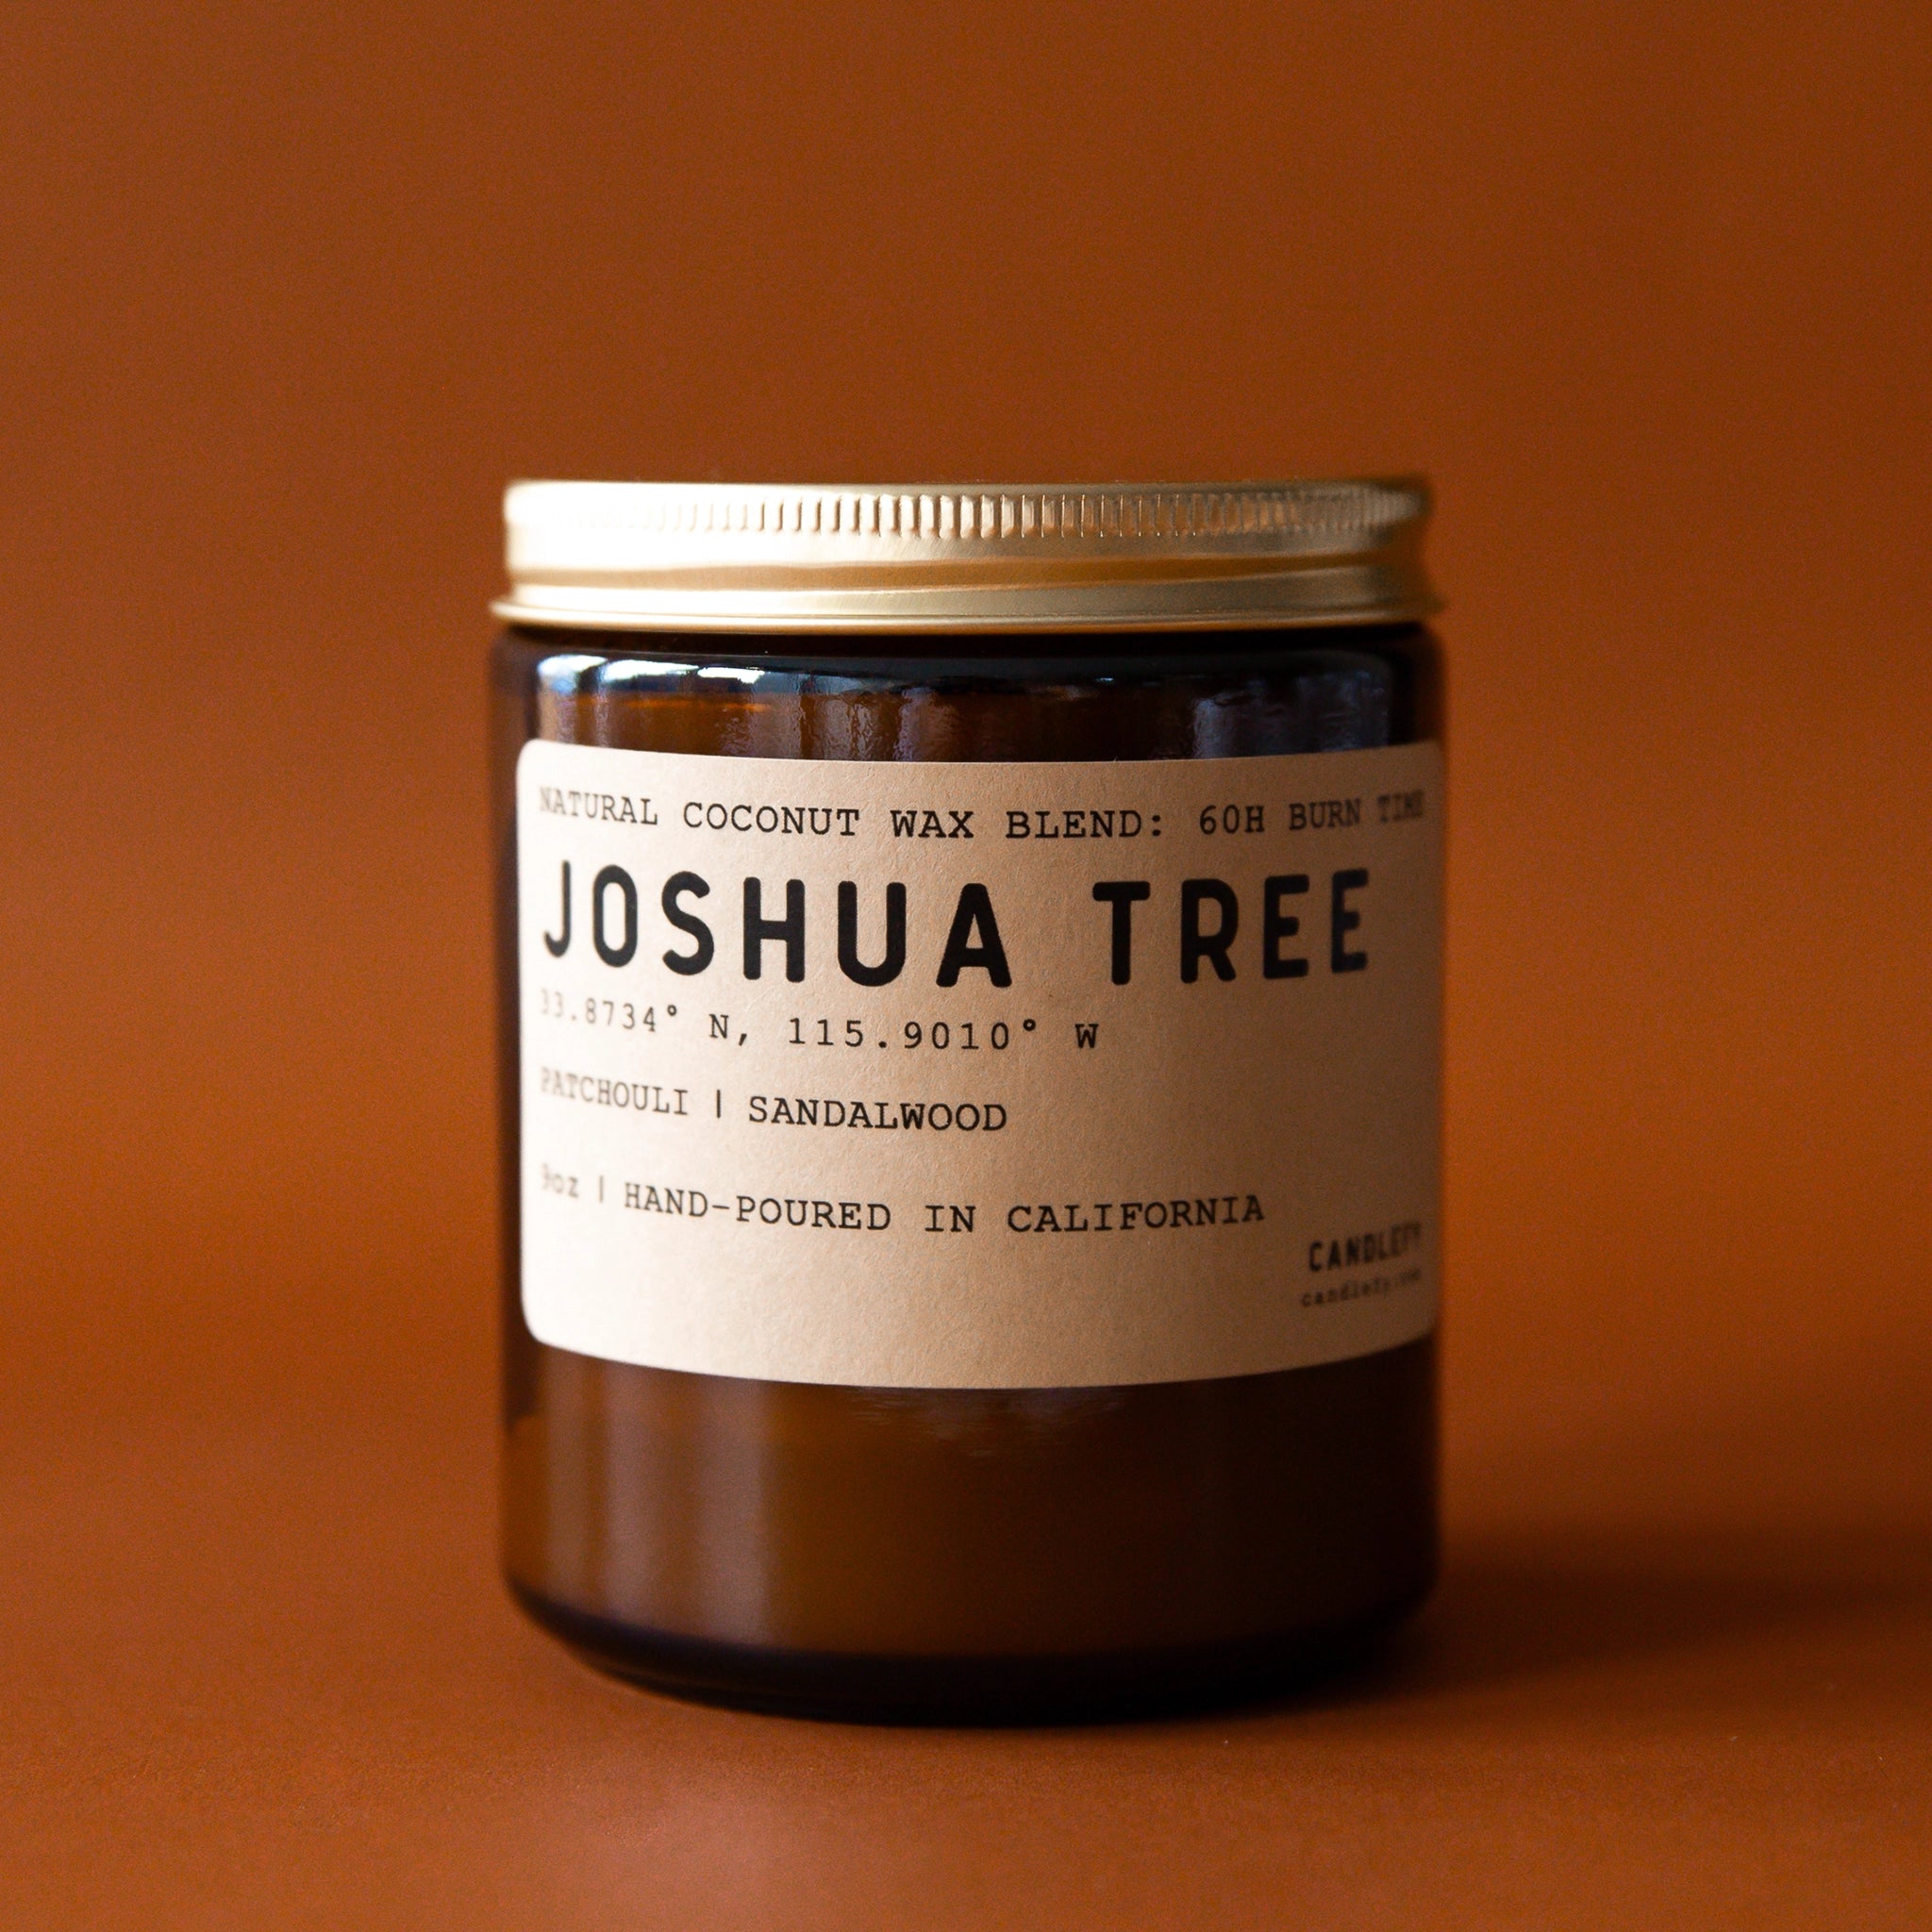  An amber colored glass candle jar with a brown label on the front that reads, "Joshua Tree Patchouli | Sandalwood" in black letter along with a single wick candle inside the jar and a gold screw on lid.